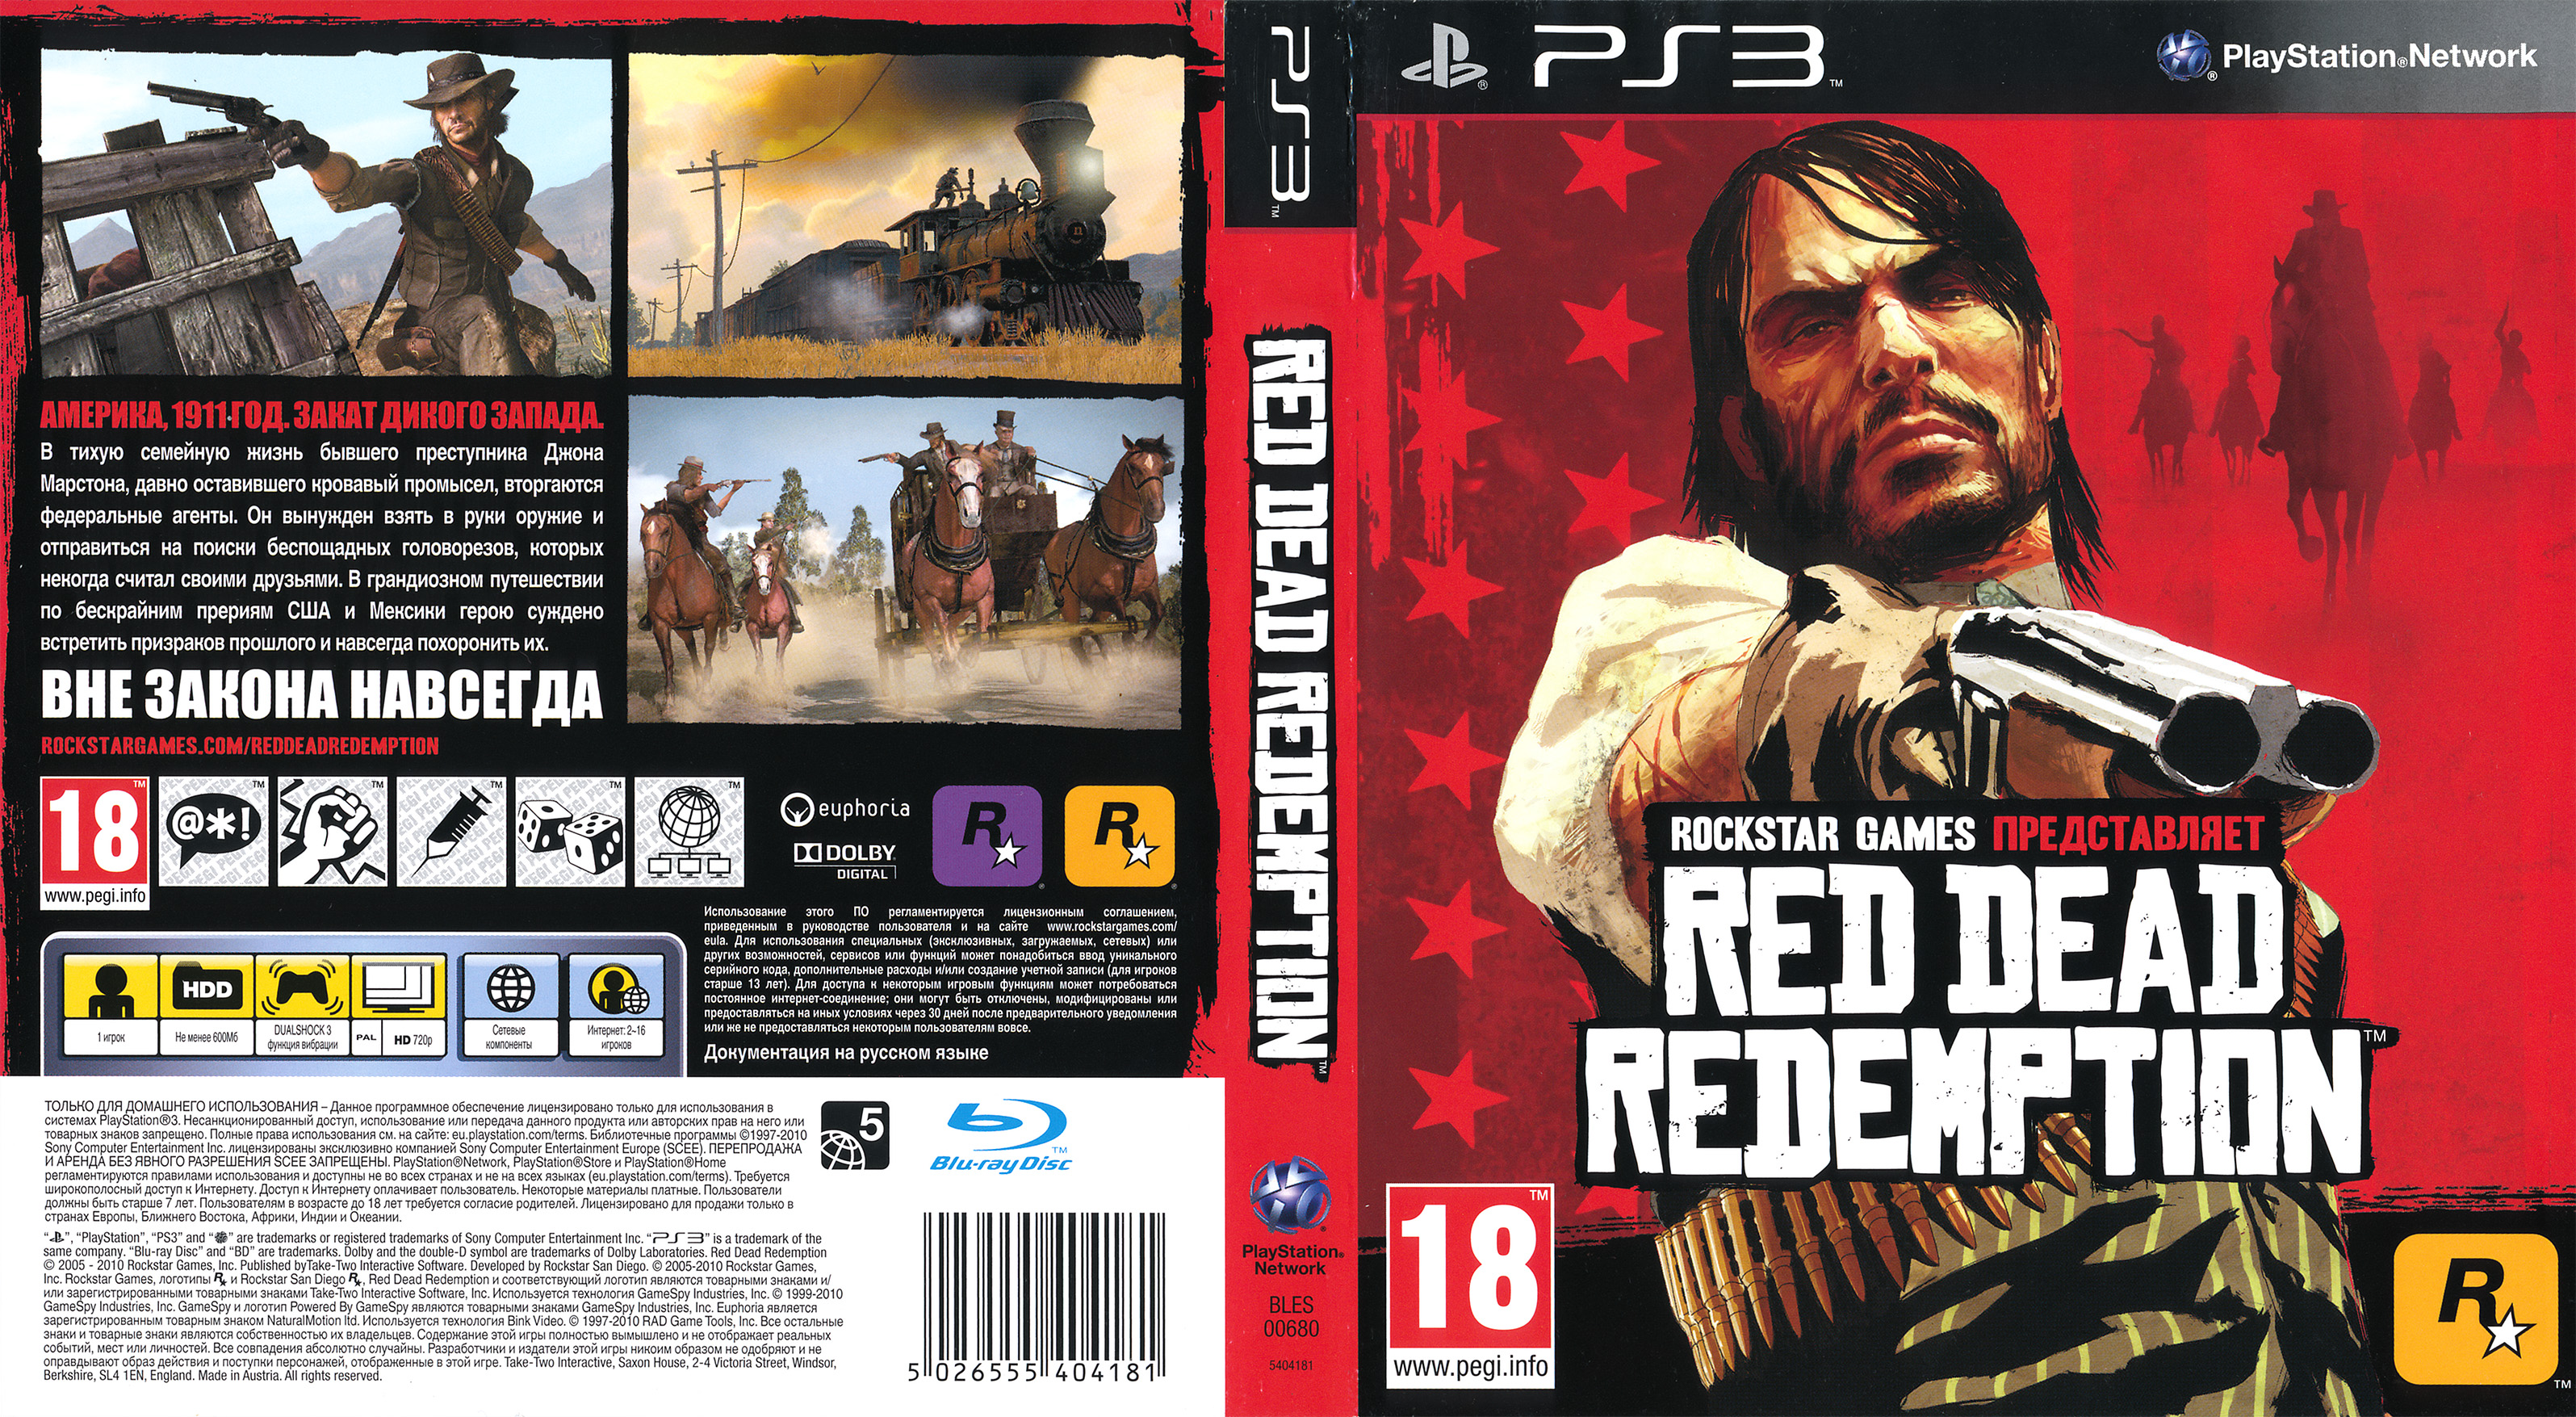 Игра red ps4. Rdr ps3 диск. Red Dead Redemption Sony PLAYSTATION 3. Red Dead Redemption ps3 диск. Red Dead Redemption 1 диск ps3.